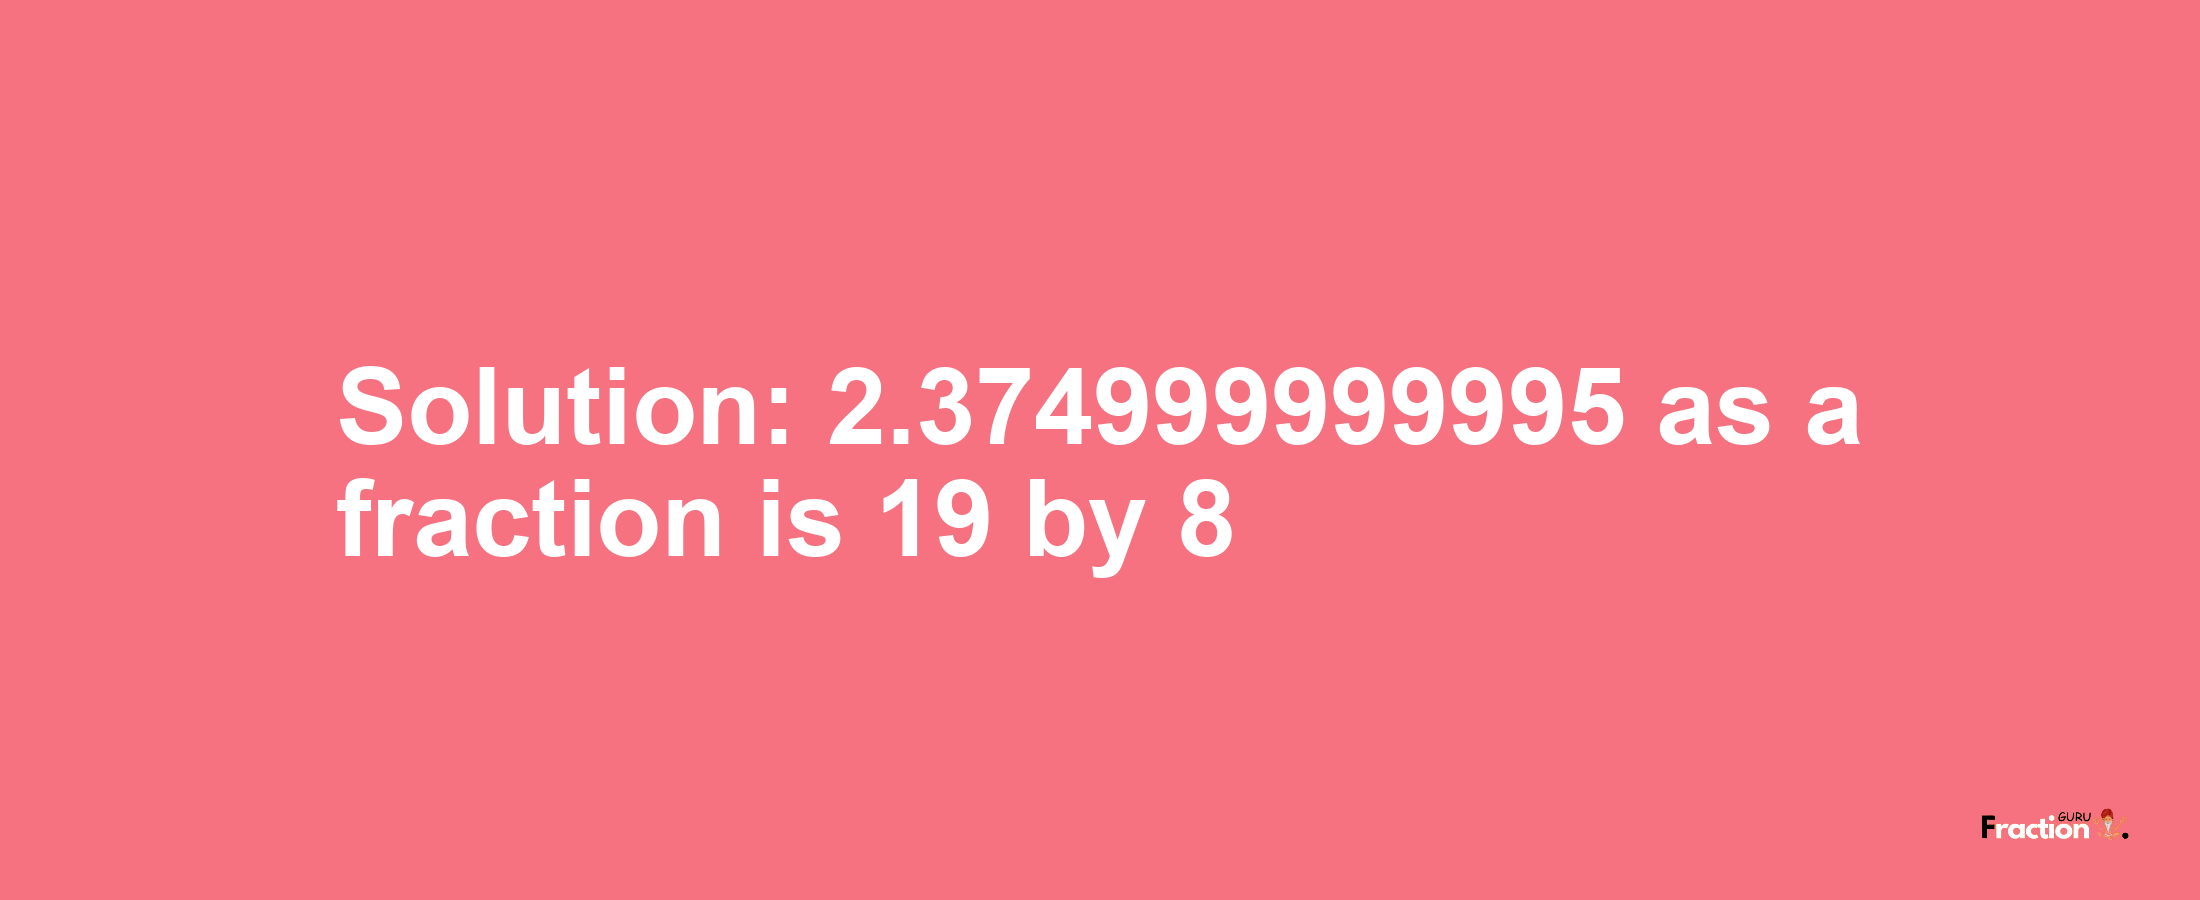 Solution:2.374999999995 as a fraction is 19/8